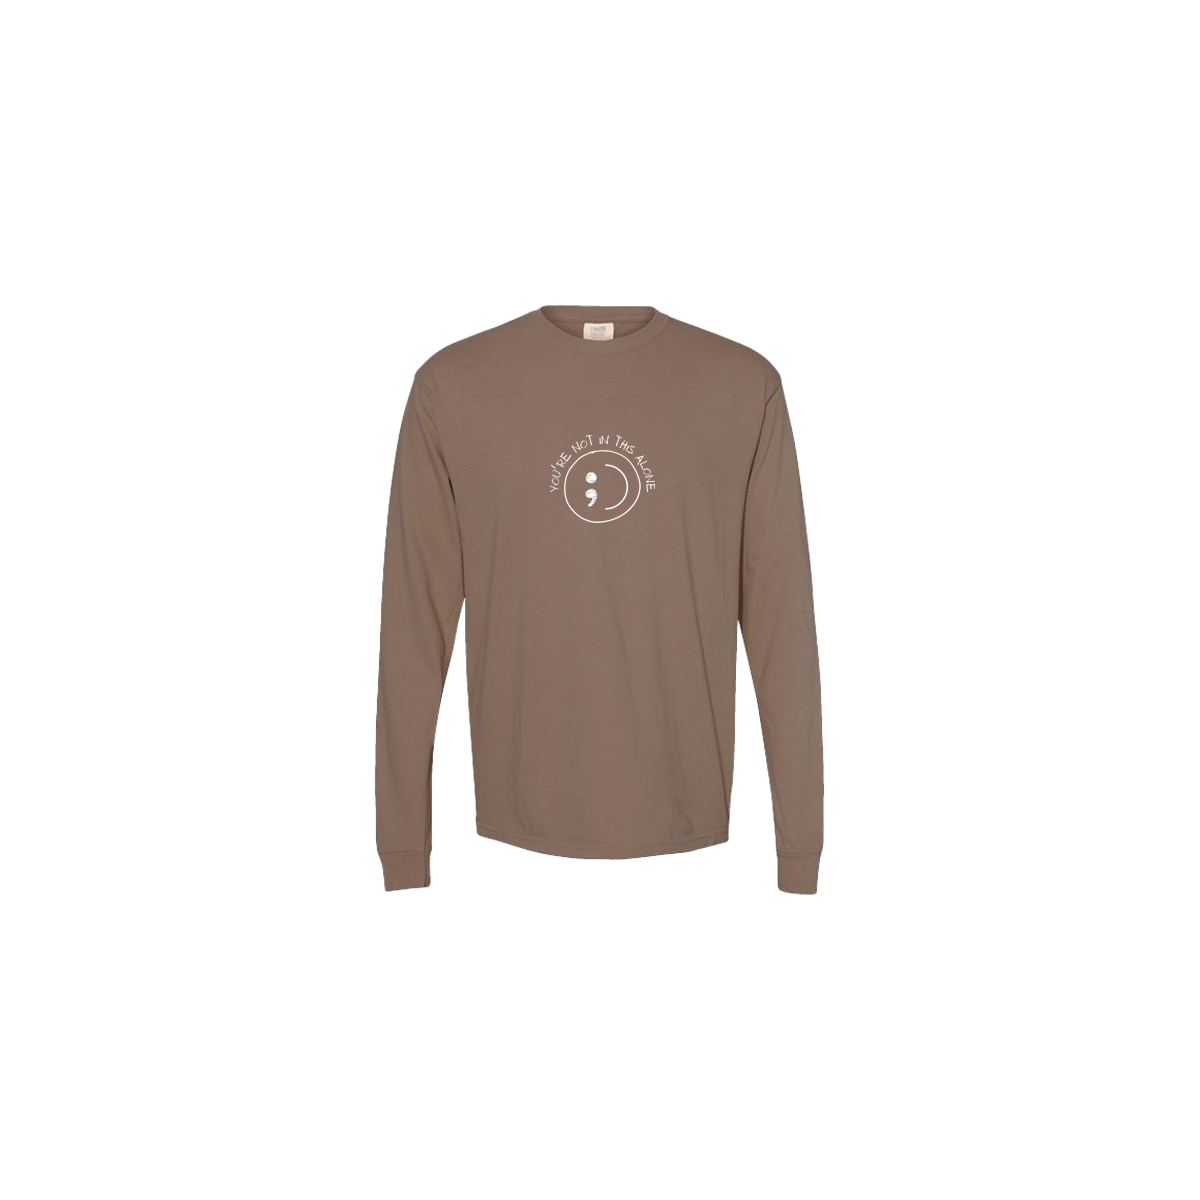 You're Not In This Alone Embroidered Brown Long Sleeve Tshirt - Mental Health Awareness Clothing